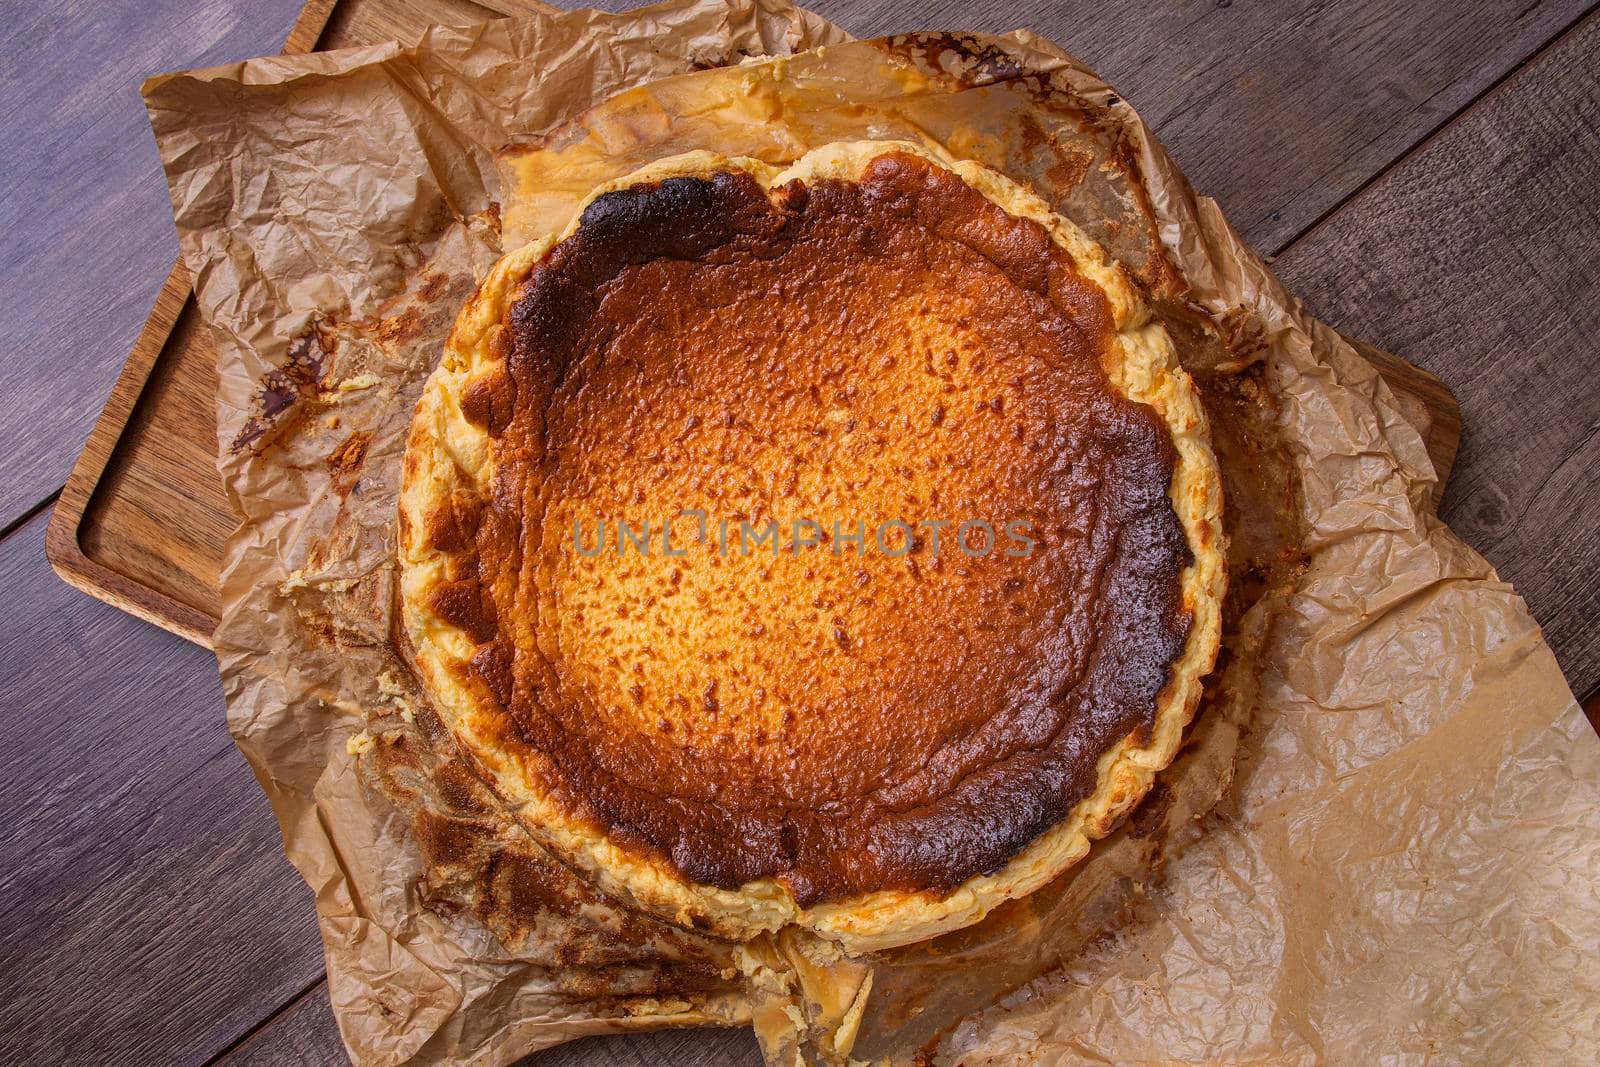 Top view of a still life of a cheesecake fresh from the oven on brown paper and wooden board. Concept of traditional Spanish gastronomy.